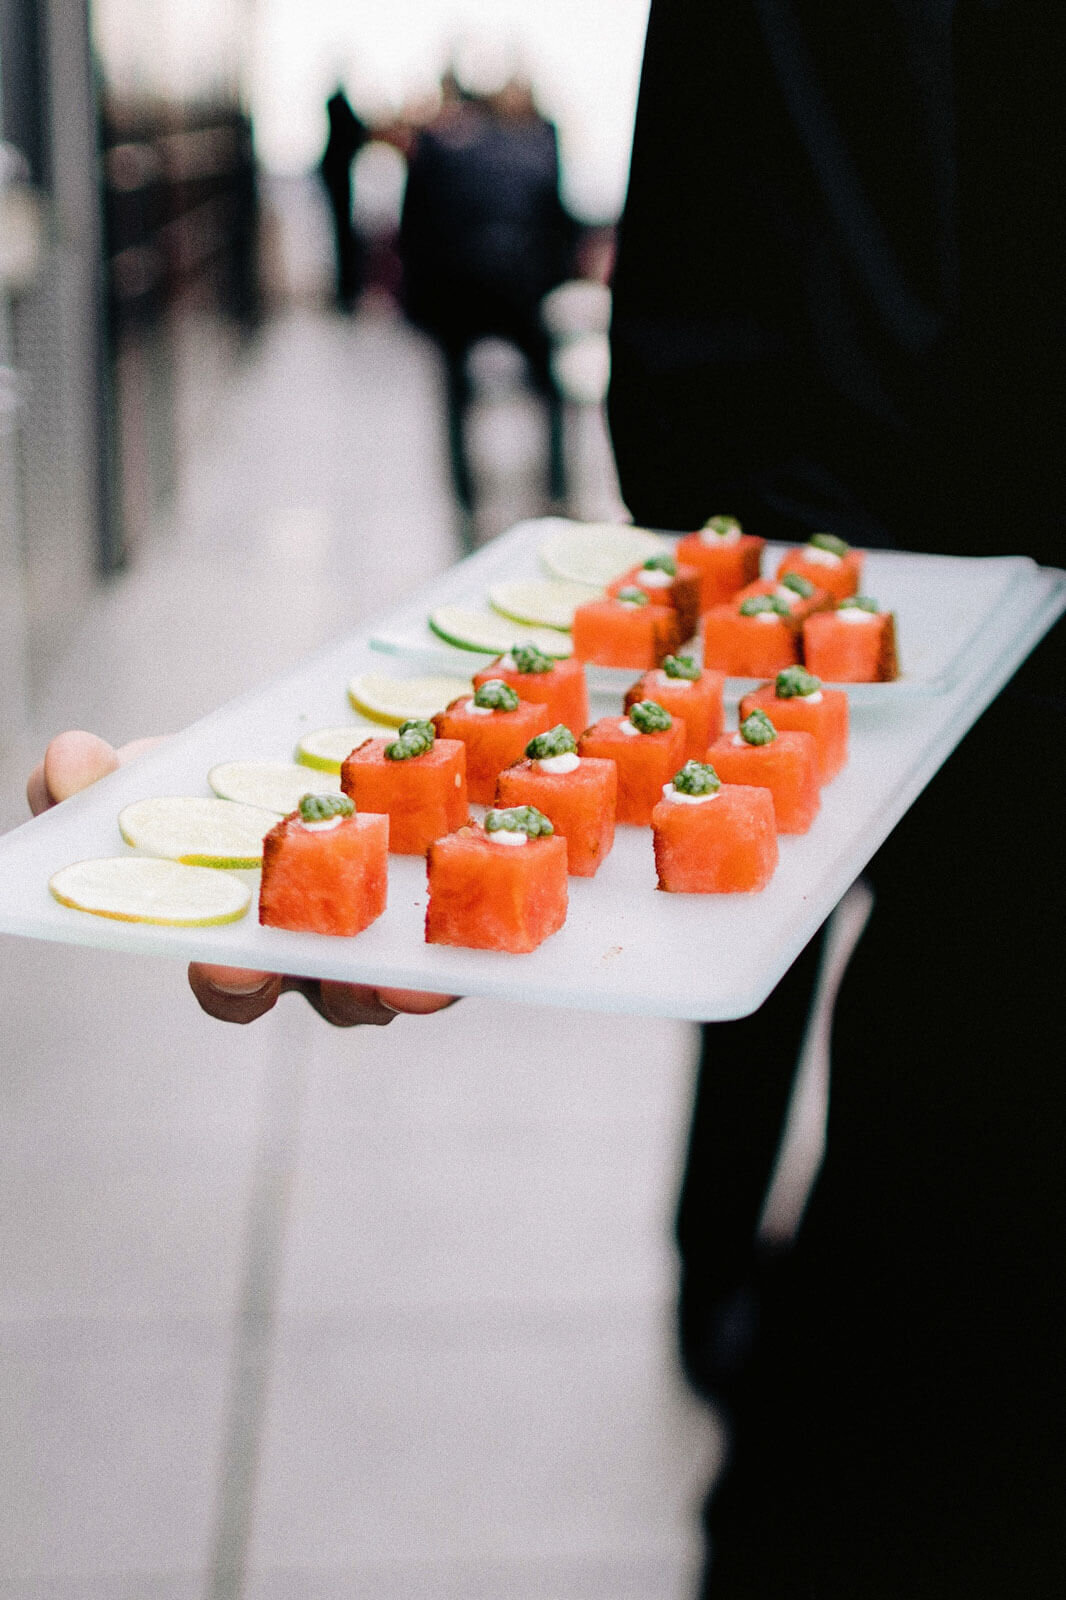 A plate with yummy-looking sushi in The Skylark, New York. Wedding Image by Jenny Fu Studio